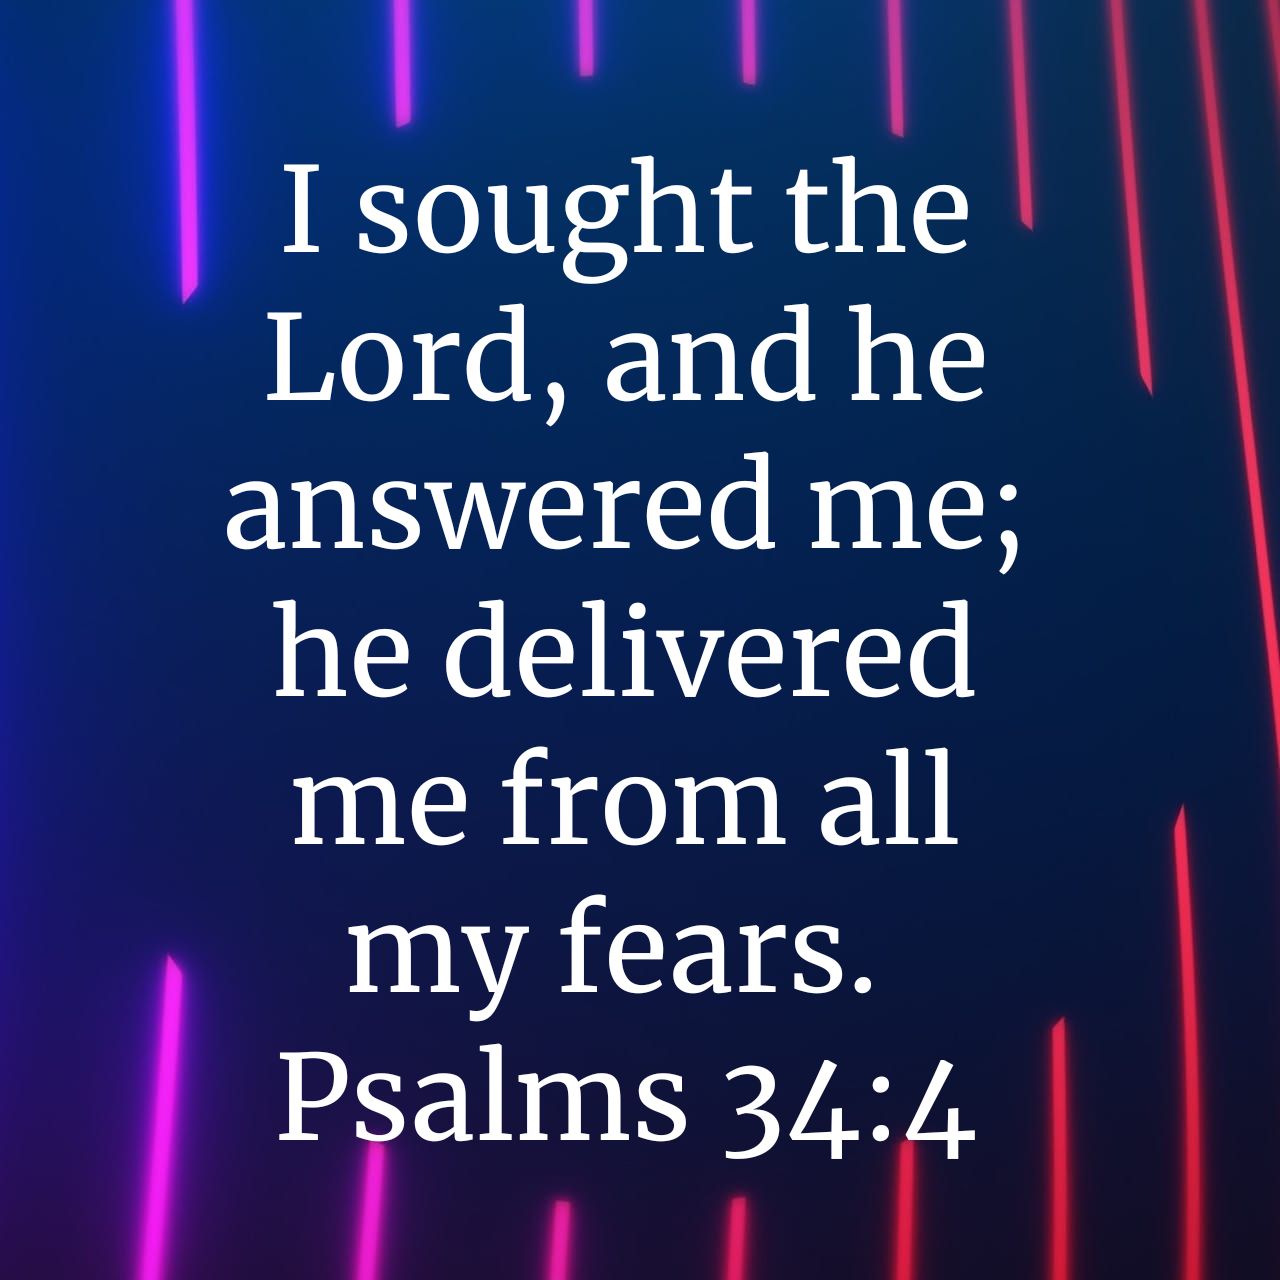 I sought the Lord, and he answered me; he delivered me from all my fears. Psalms 34:4